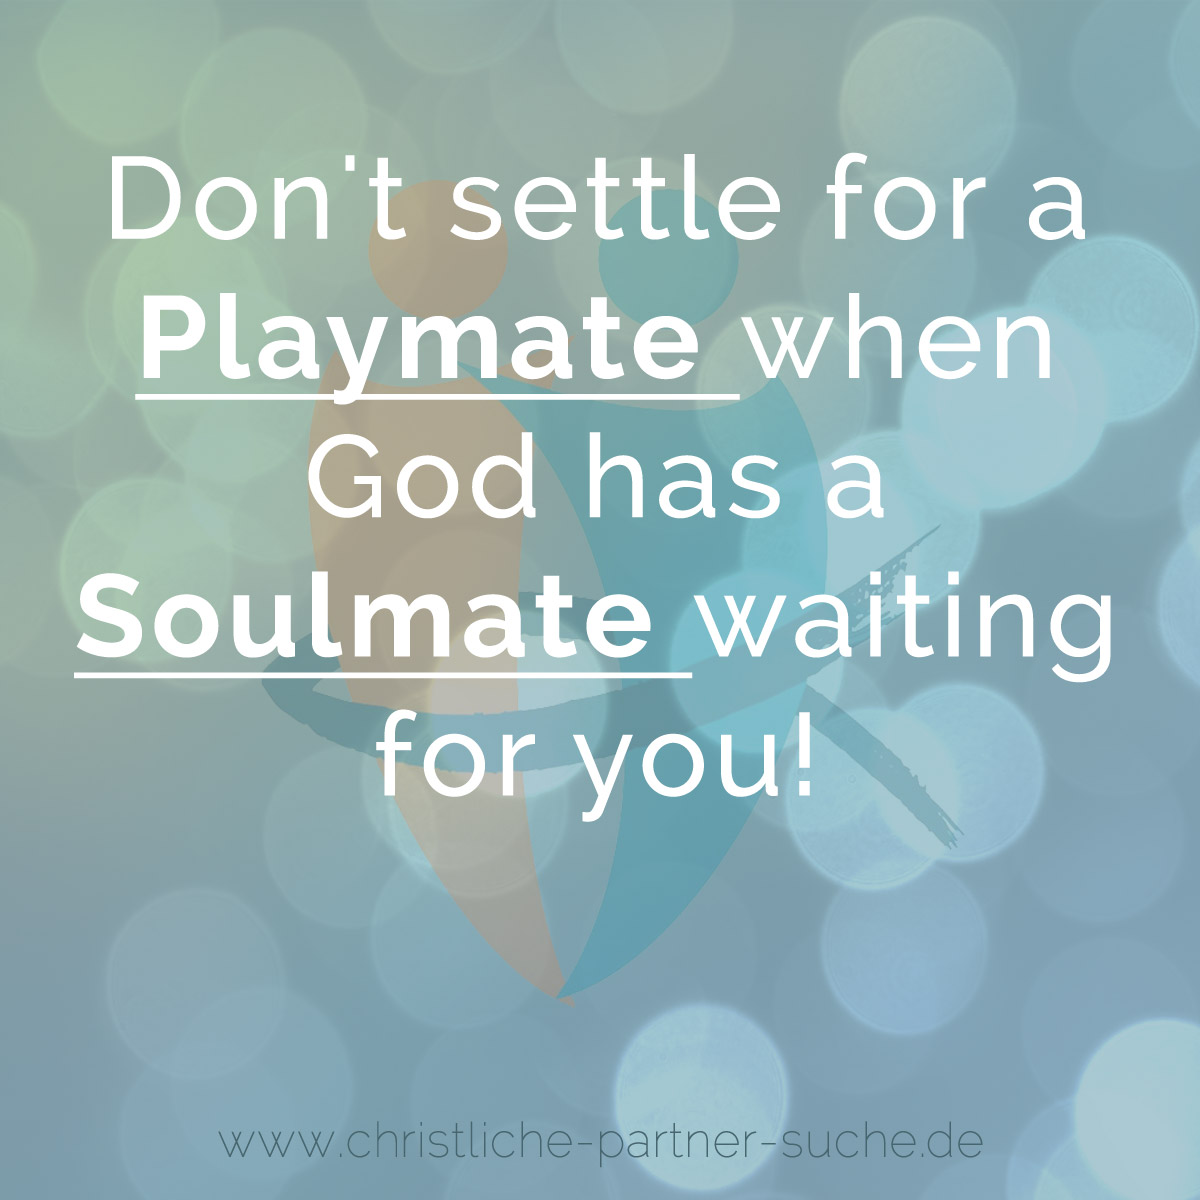 Don't settle for a Playmate